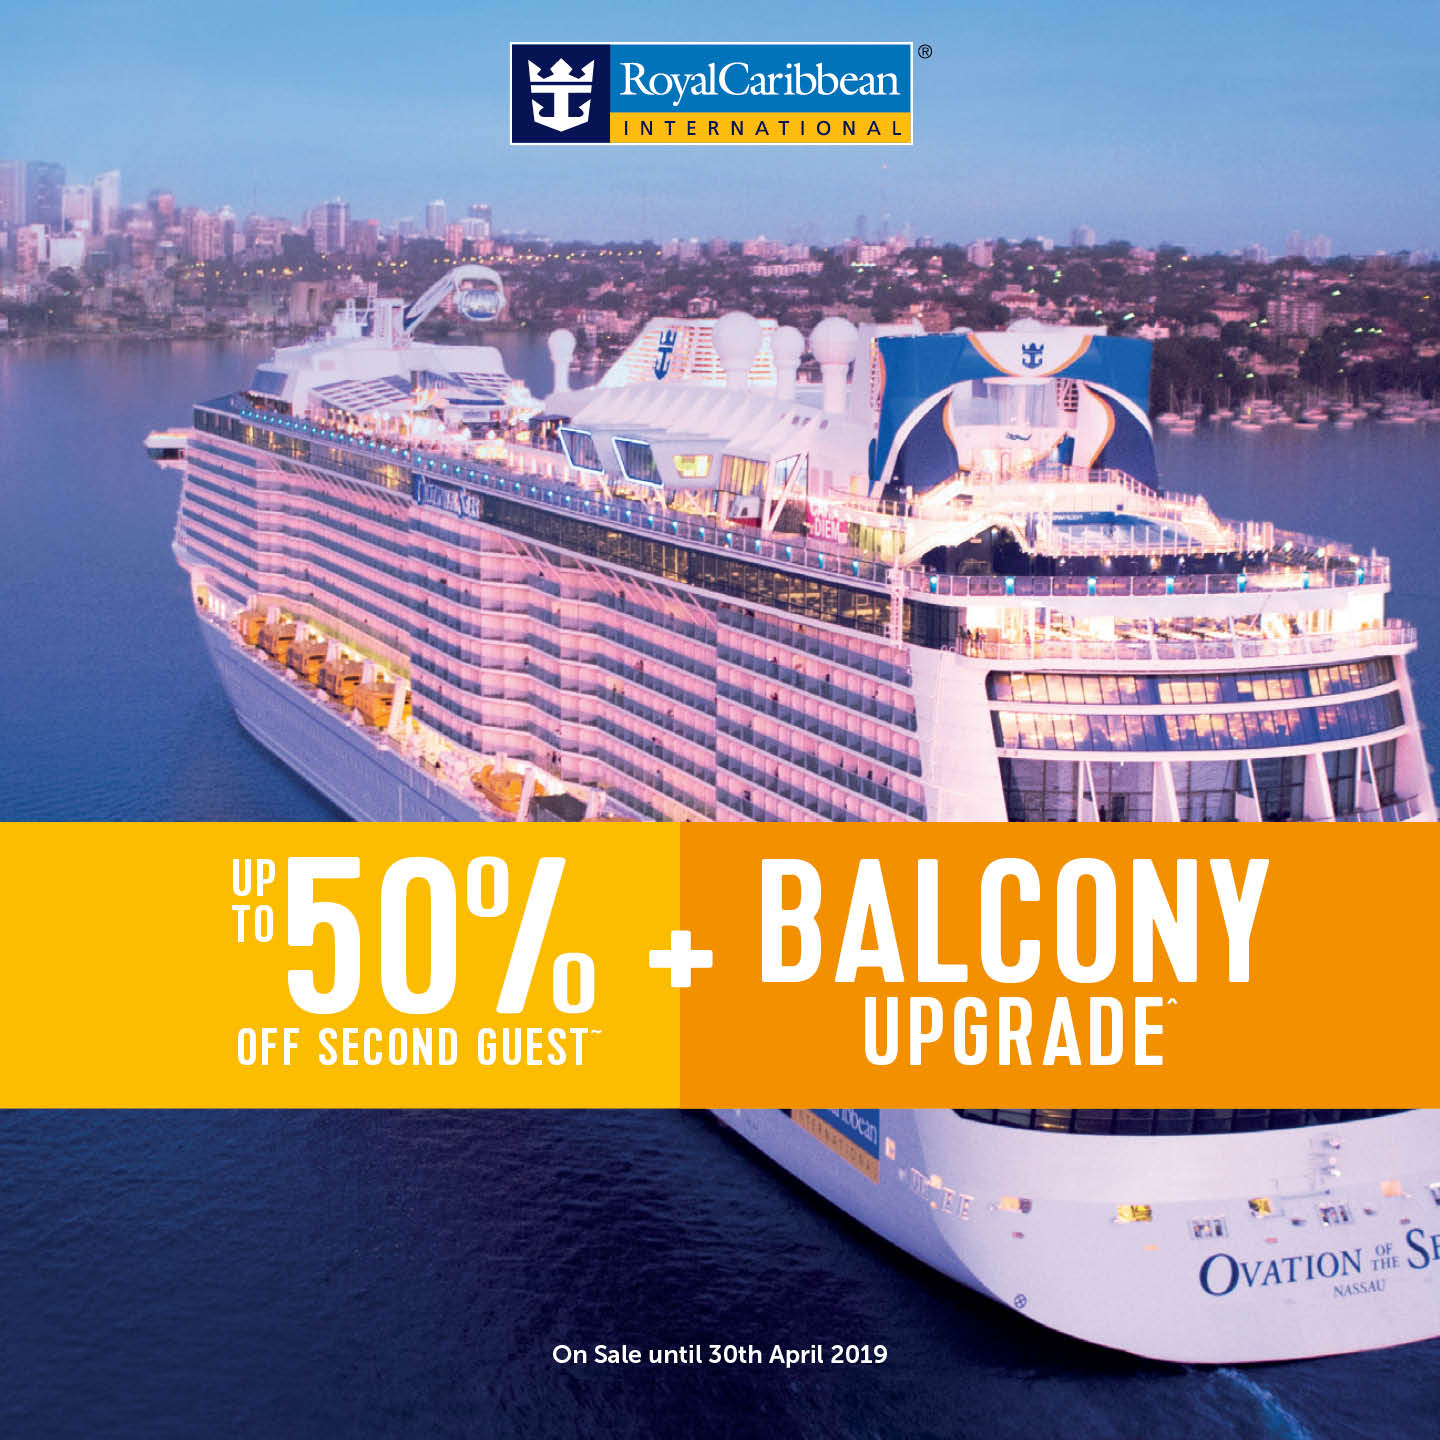 Royal Caribbean Cruise Deals The best cruise bargains on Royal